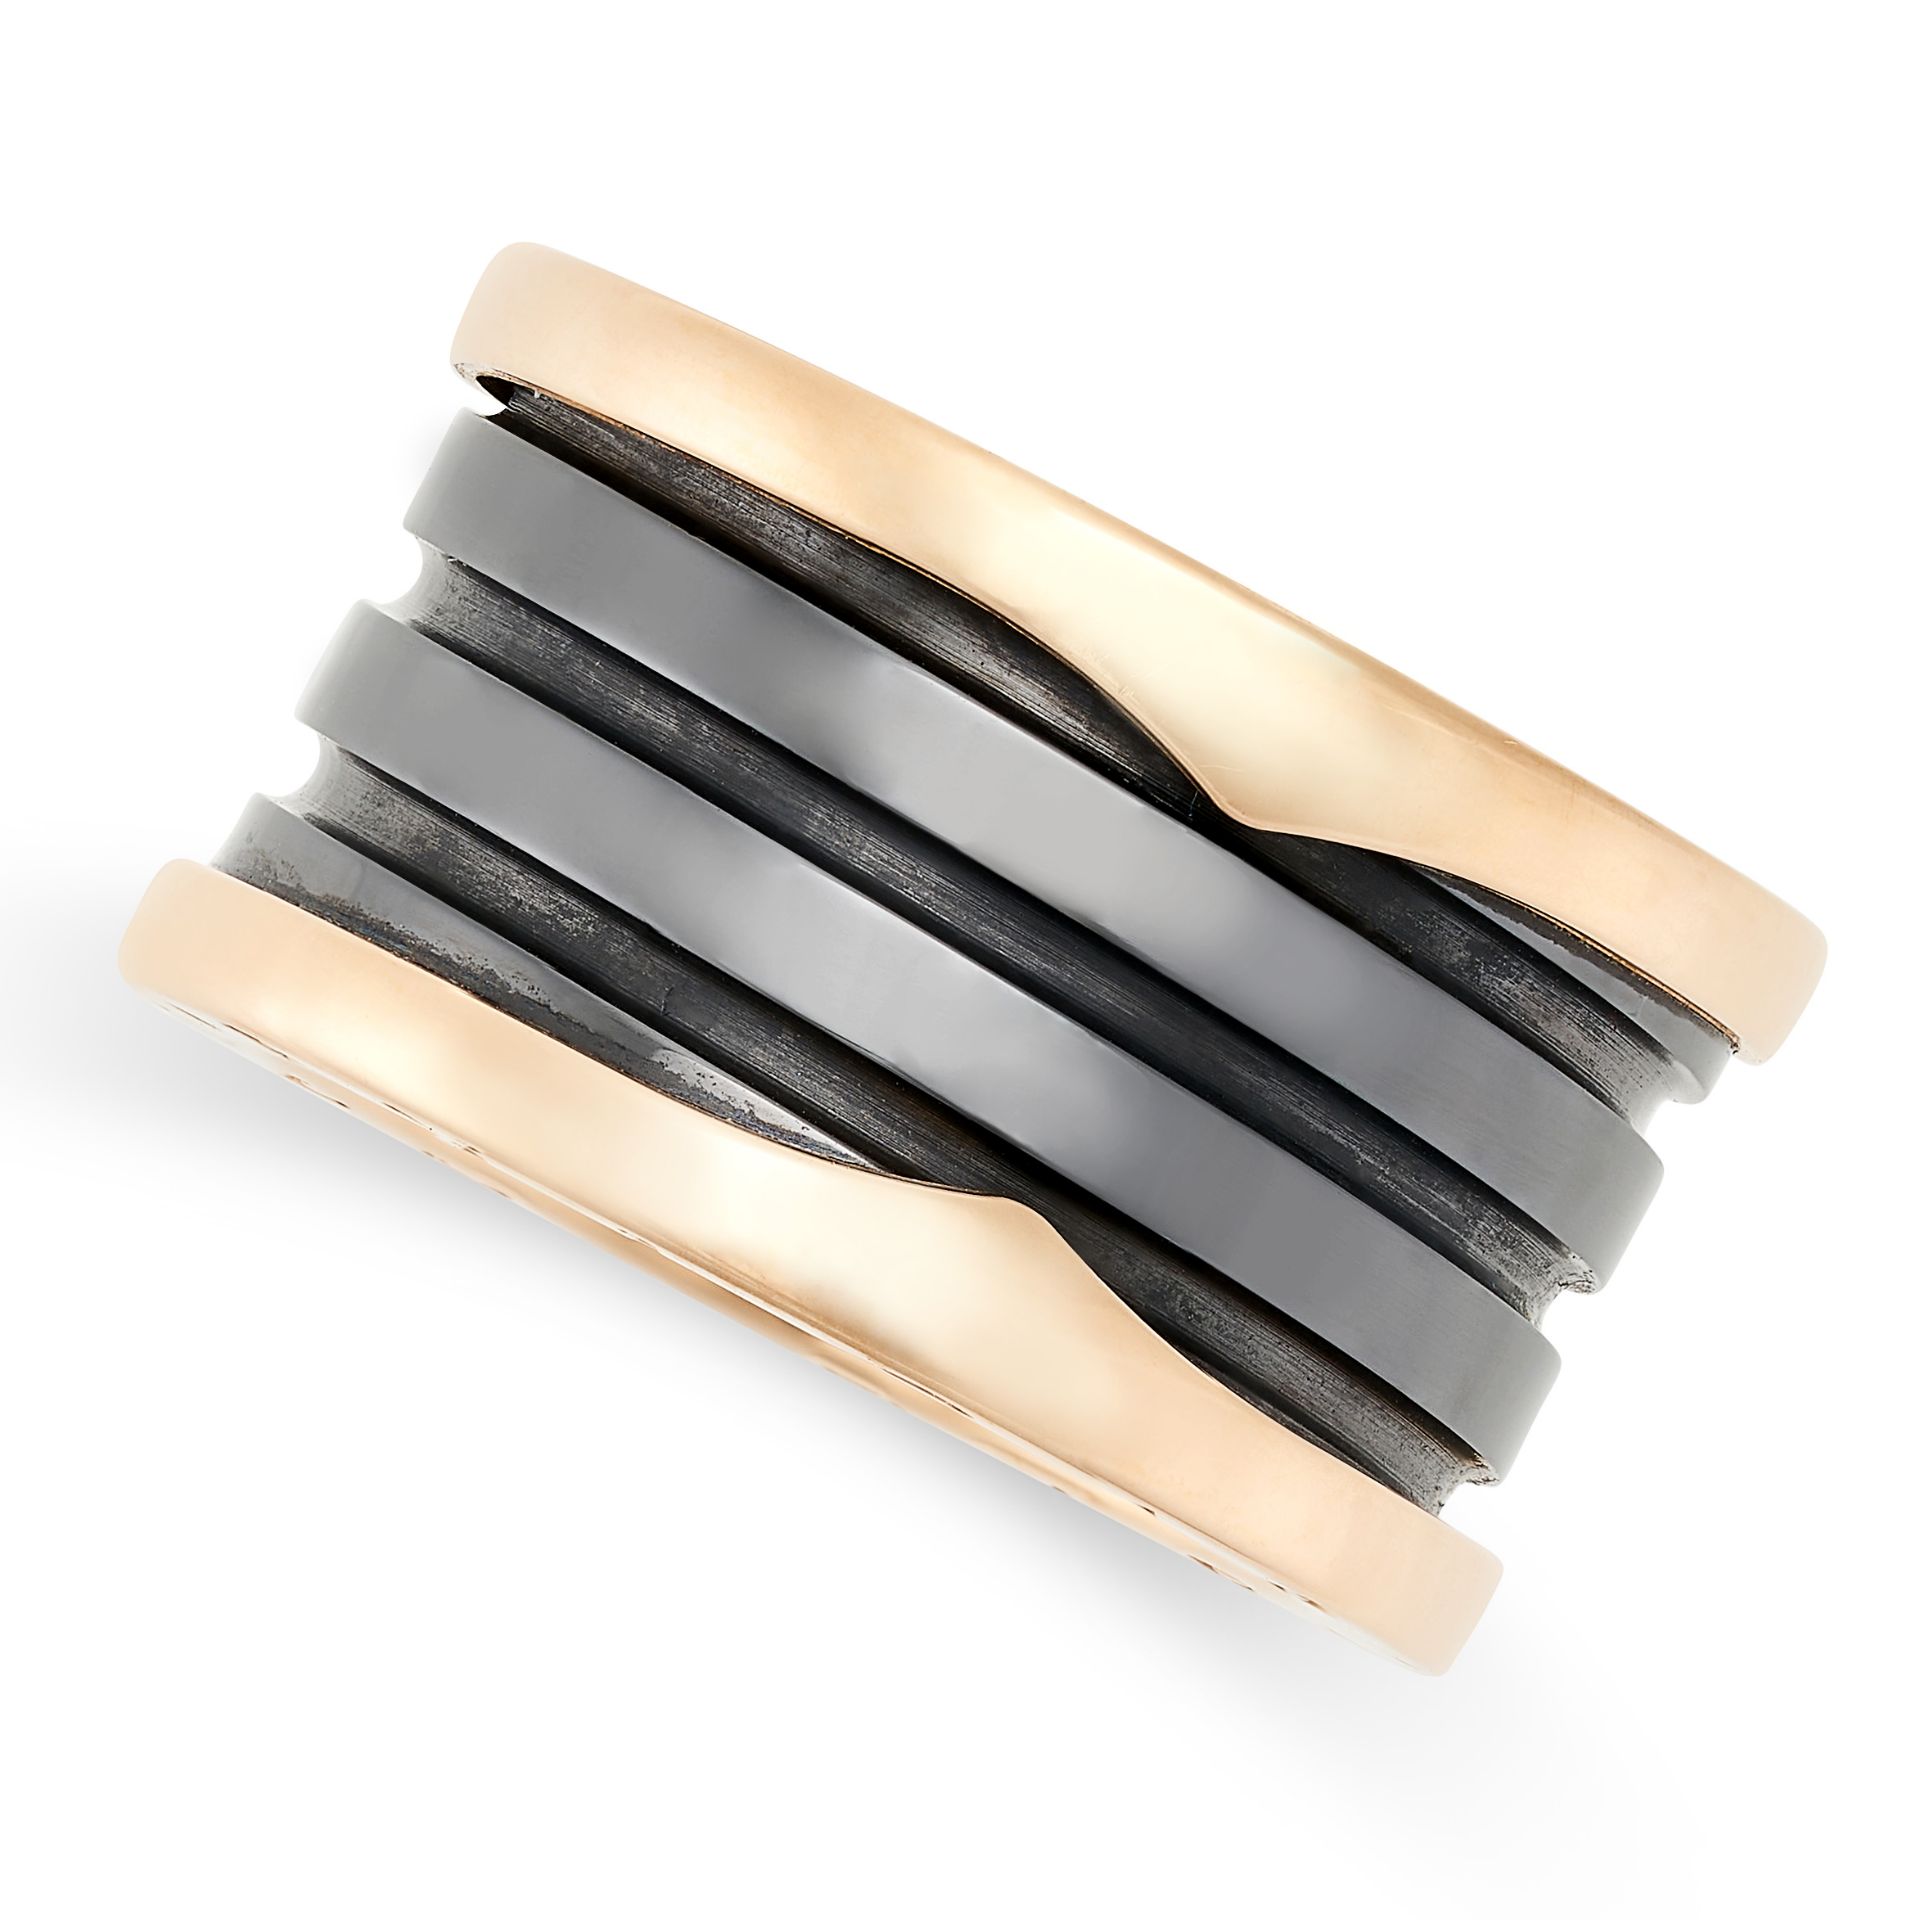 BULGARI, B.ZERO 1 CERAMIC RING in 18ct rose gold, the articulated band with engraved lettering '